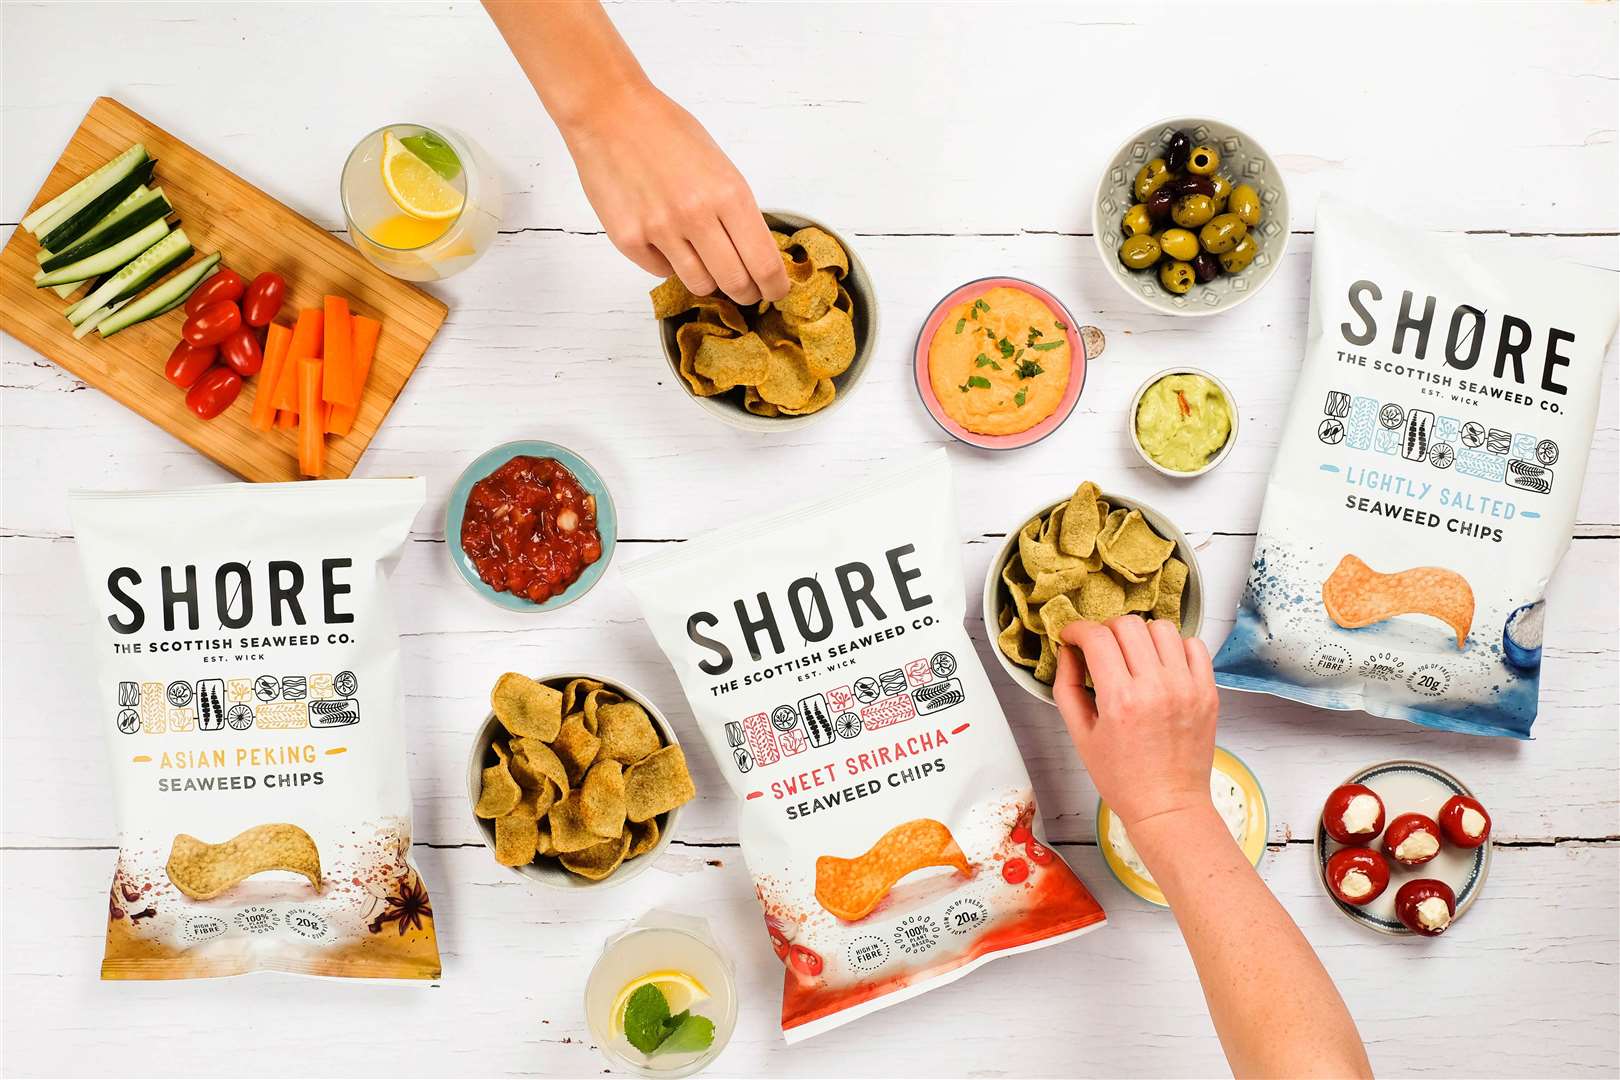 Highland harvested seaweed snack Shore is set to expand into Europe following a deal with a major Belgian supermarket chain.